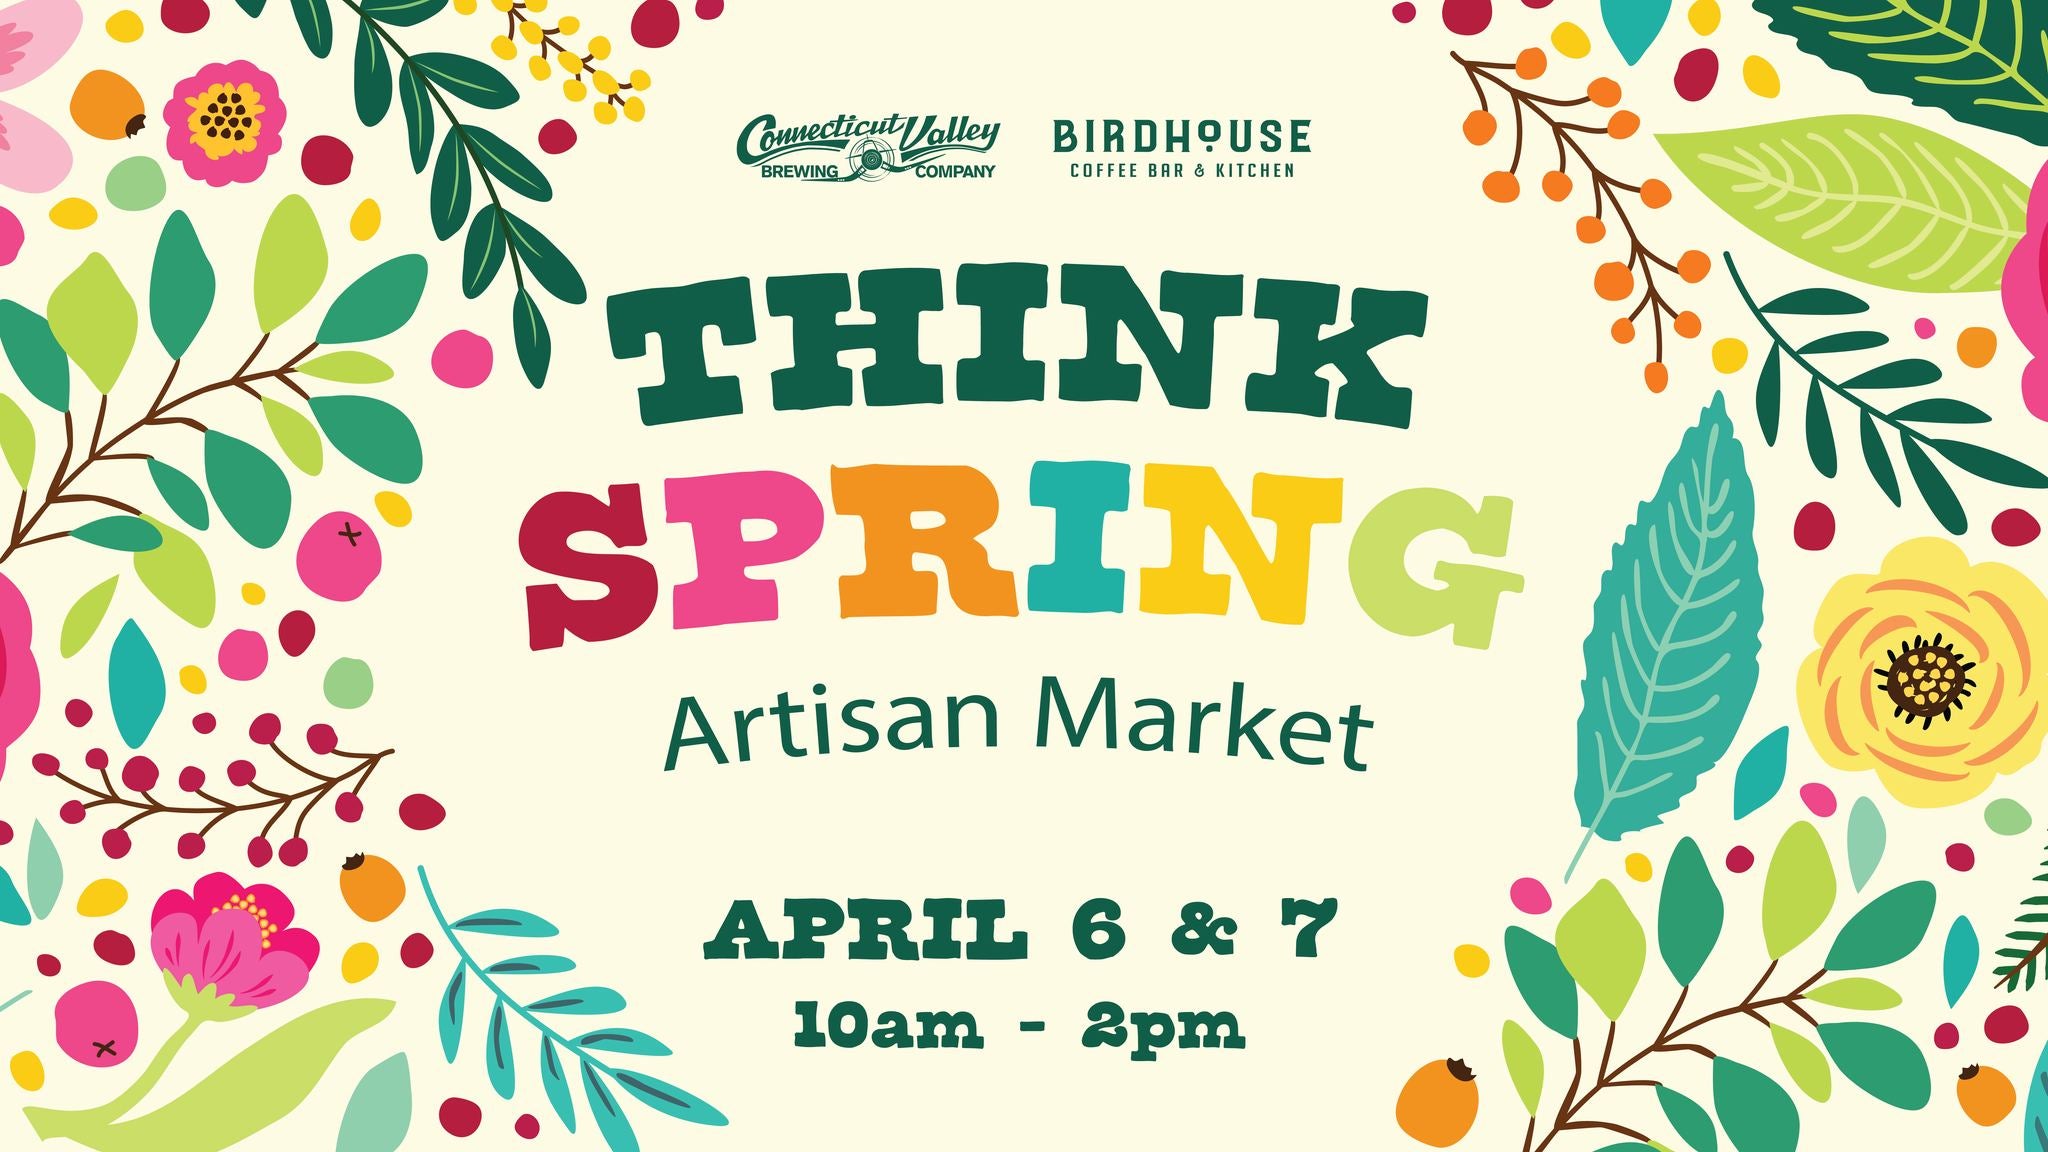 Connecticut Valley Brewing Company Think Spring Market flyer